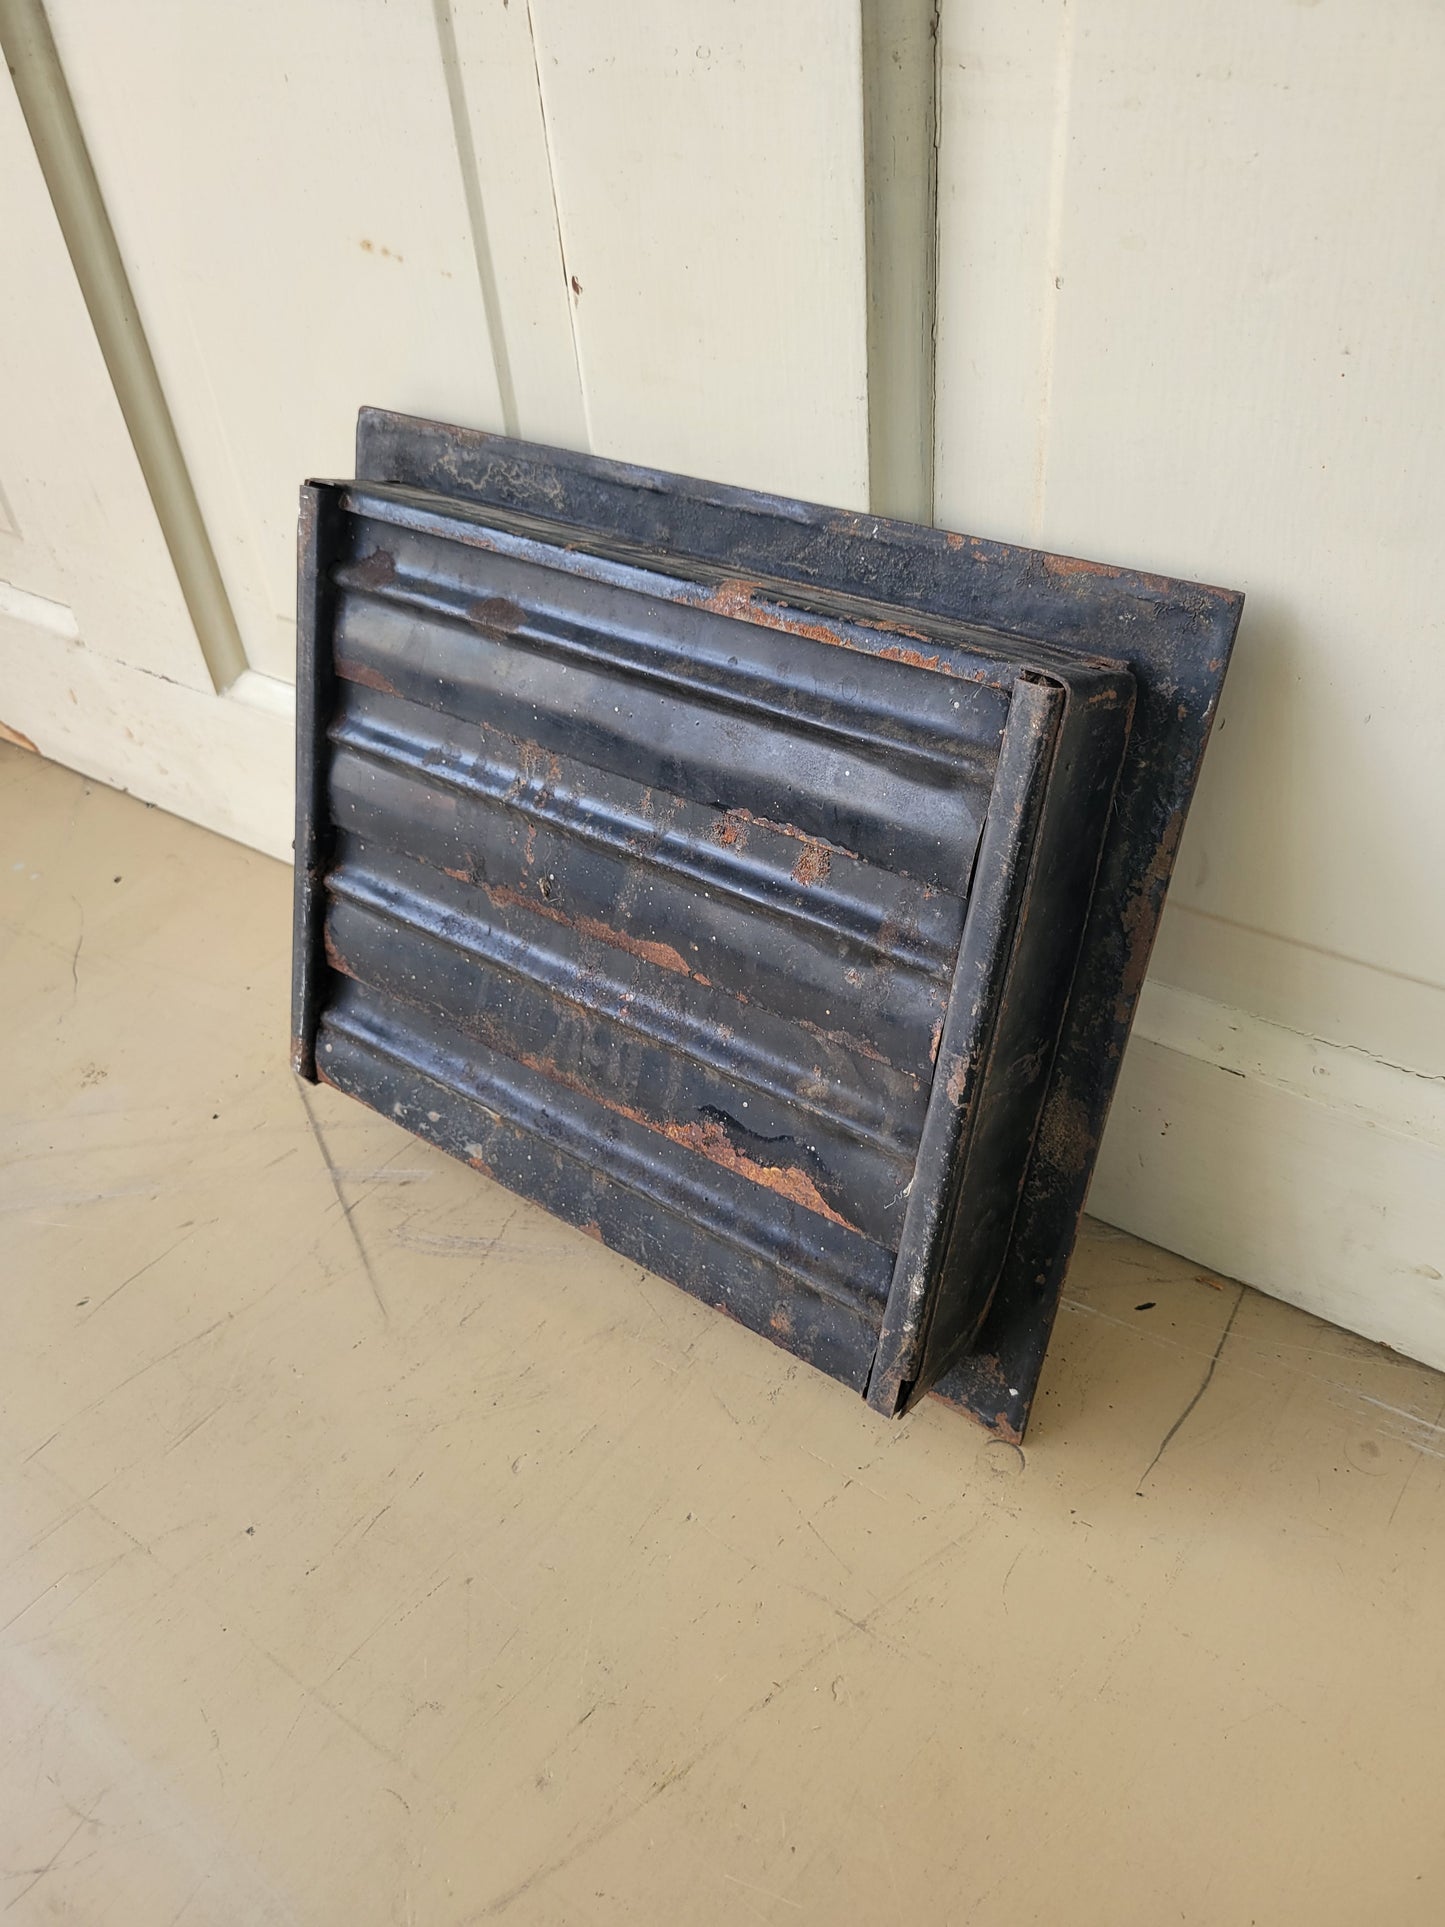 10 x 12 Antique Cast Iron Working Vent Cover, Floor Register Cover with Dampers #031803